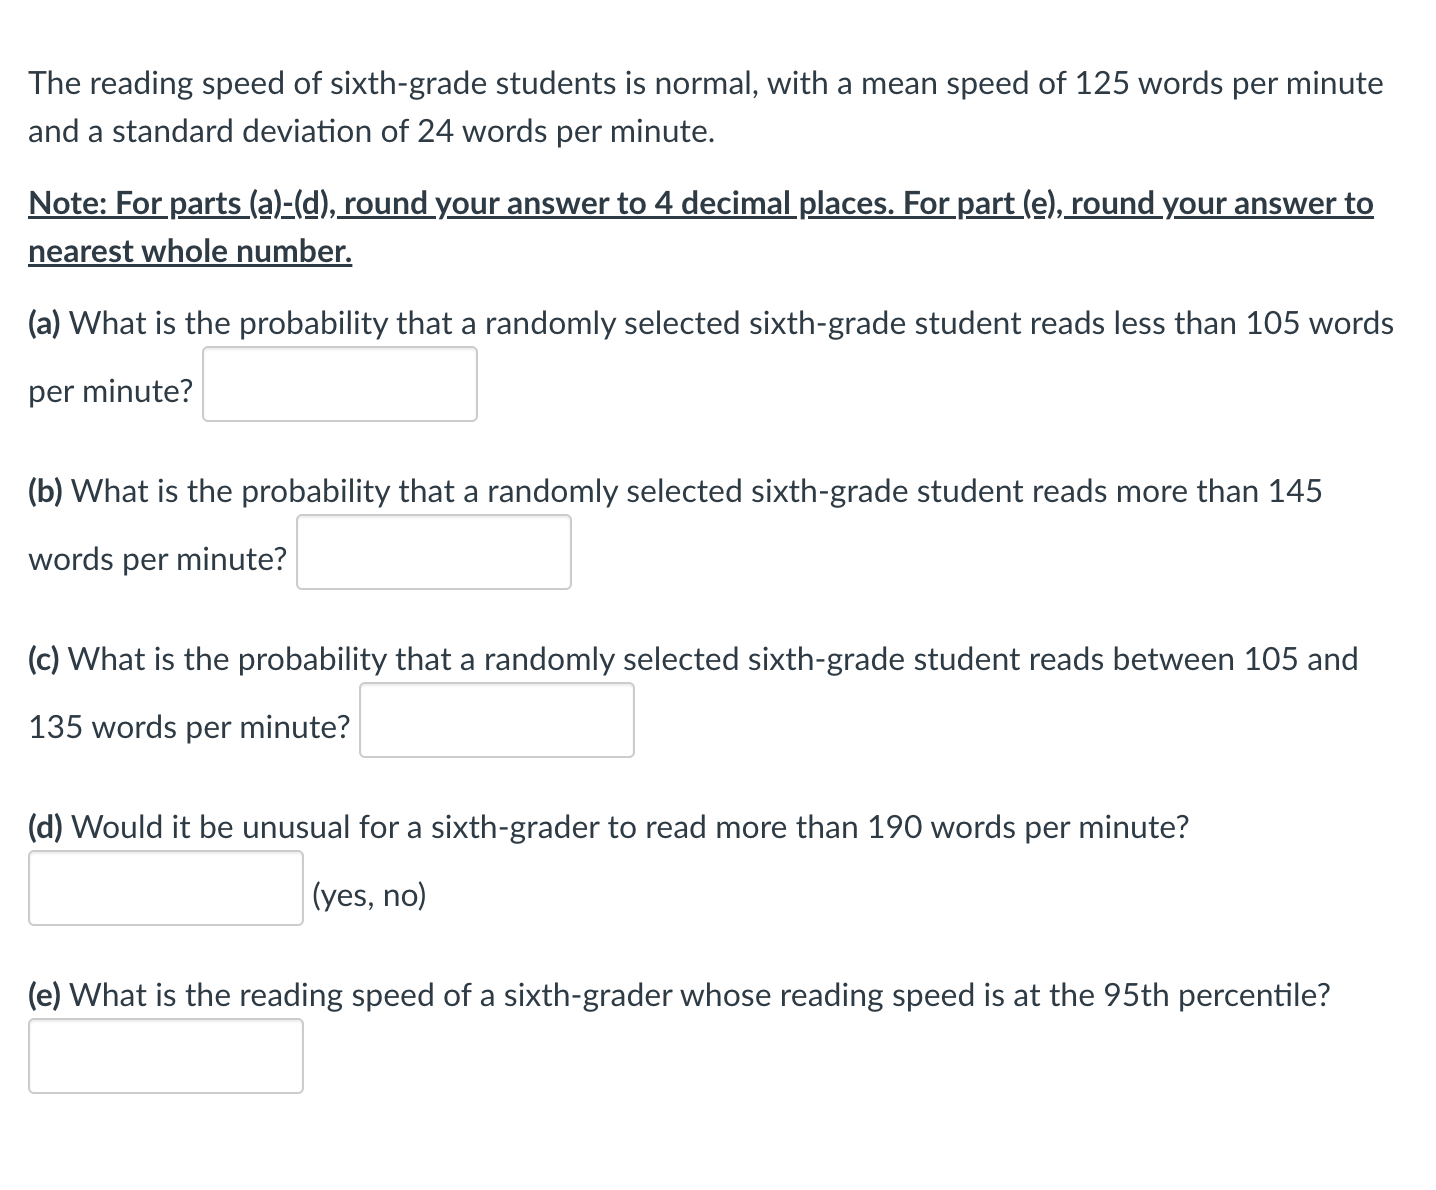 ---

**Reading Speed of Sixth-Grade Students: Normal Distribution Analysis**

The reading speed of sixth-grade students follows a normal distribution, with a mean (average) speed of 125 words per minute and a standard deviation of 24 words per minute.

**Instructions:**
1. For parts (a) to (d), round your answers to 4 decimal places.
2. For part (e), round your answer to the nearest whole number.

**Questions and Input Fields:**

(a) **Probability of Reading Less than 105 Words per Minute:**
   
   What is the probability that a randomly selected sixth-grade student reads less than 105 words per minute?
   
   \[ Answer: \]

(b) **Probability of Reading More than 145 Words per Minute:**

   What is the probability that a randomly selected sixth-grade student reads more than 145 words per minute?
   
   \[ Answer: \]

(c) **Probability of Reading Between 105 and 135 Words per Minute:**

   What is the probability that a randomly selected sixth-grade student reads between 105 and 135 words per minute?
   
   \[ Answer: \]

(d) **Unusual Reading Speed:**

   Would it be unusual for a sixth-grader to read more than 190 words per minute? (yes, no)
   
   \[ Answer: \]

(e) **95th Percentile Reading Speed:**

   What is the reading speed of a sixth-grader whose reading speed is at the 95th percentile?
   
   \[ Answer: \]

---

By analyzing the normal distribution of reading speeds, educators and researchers can better understand and interpret the reading capabilities of sixth-grade students, identifying those who may need additional support or those who are excelling.

